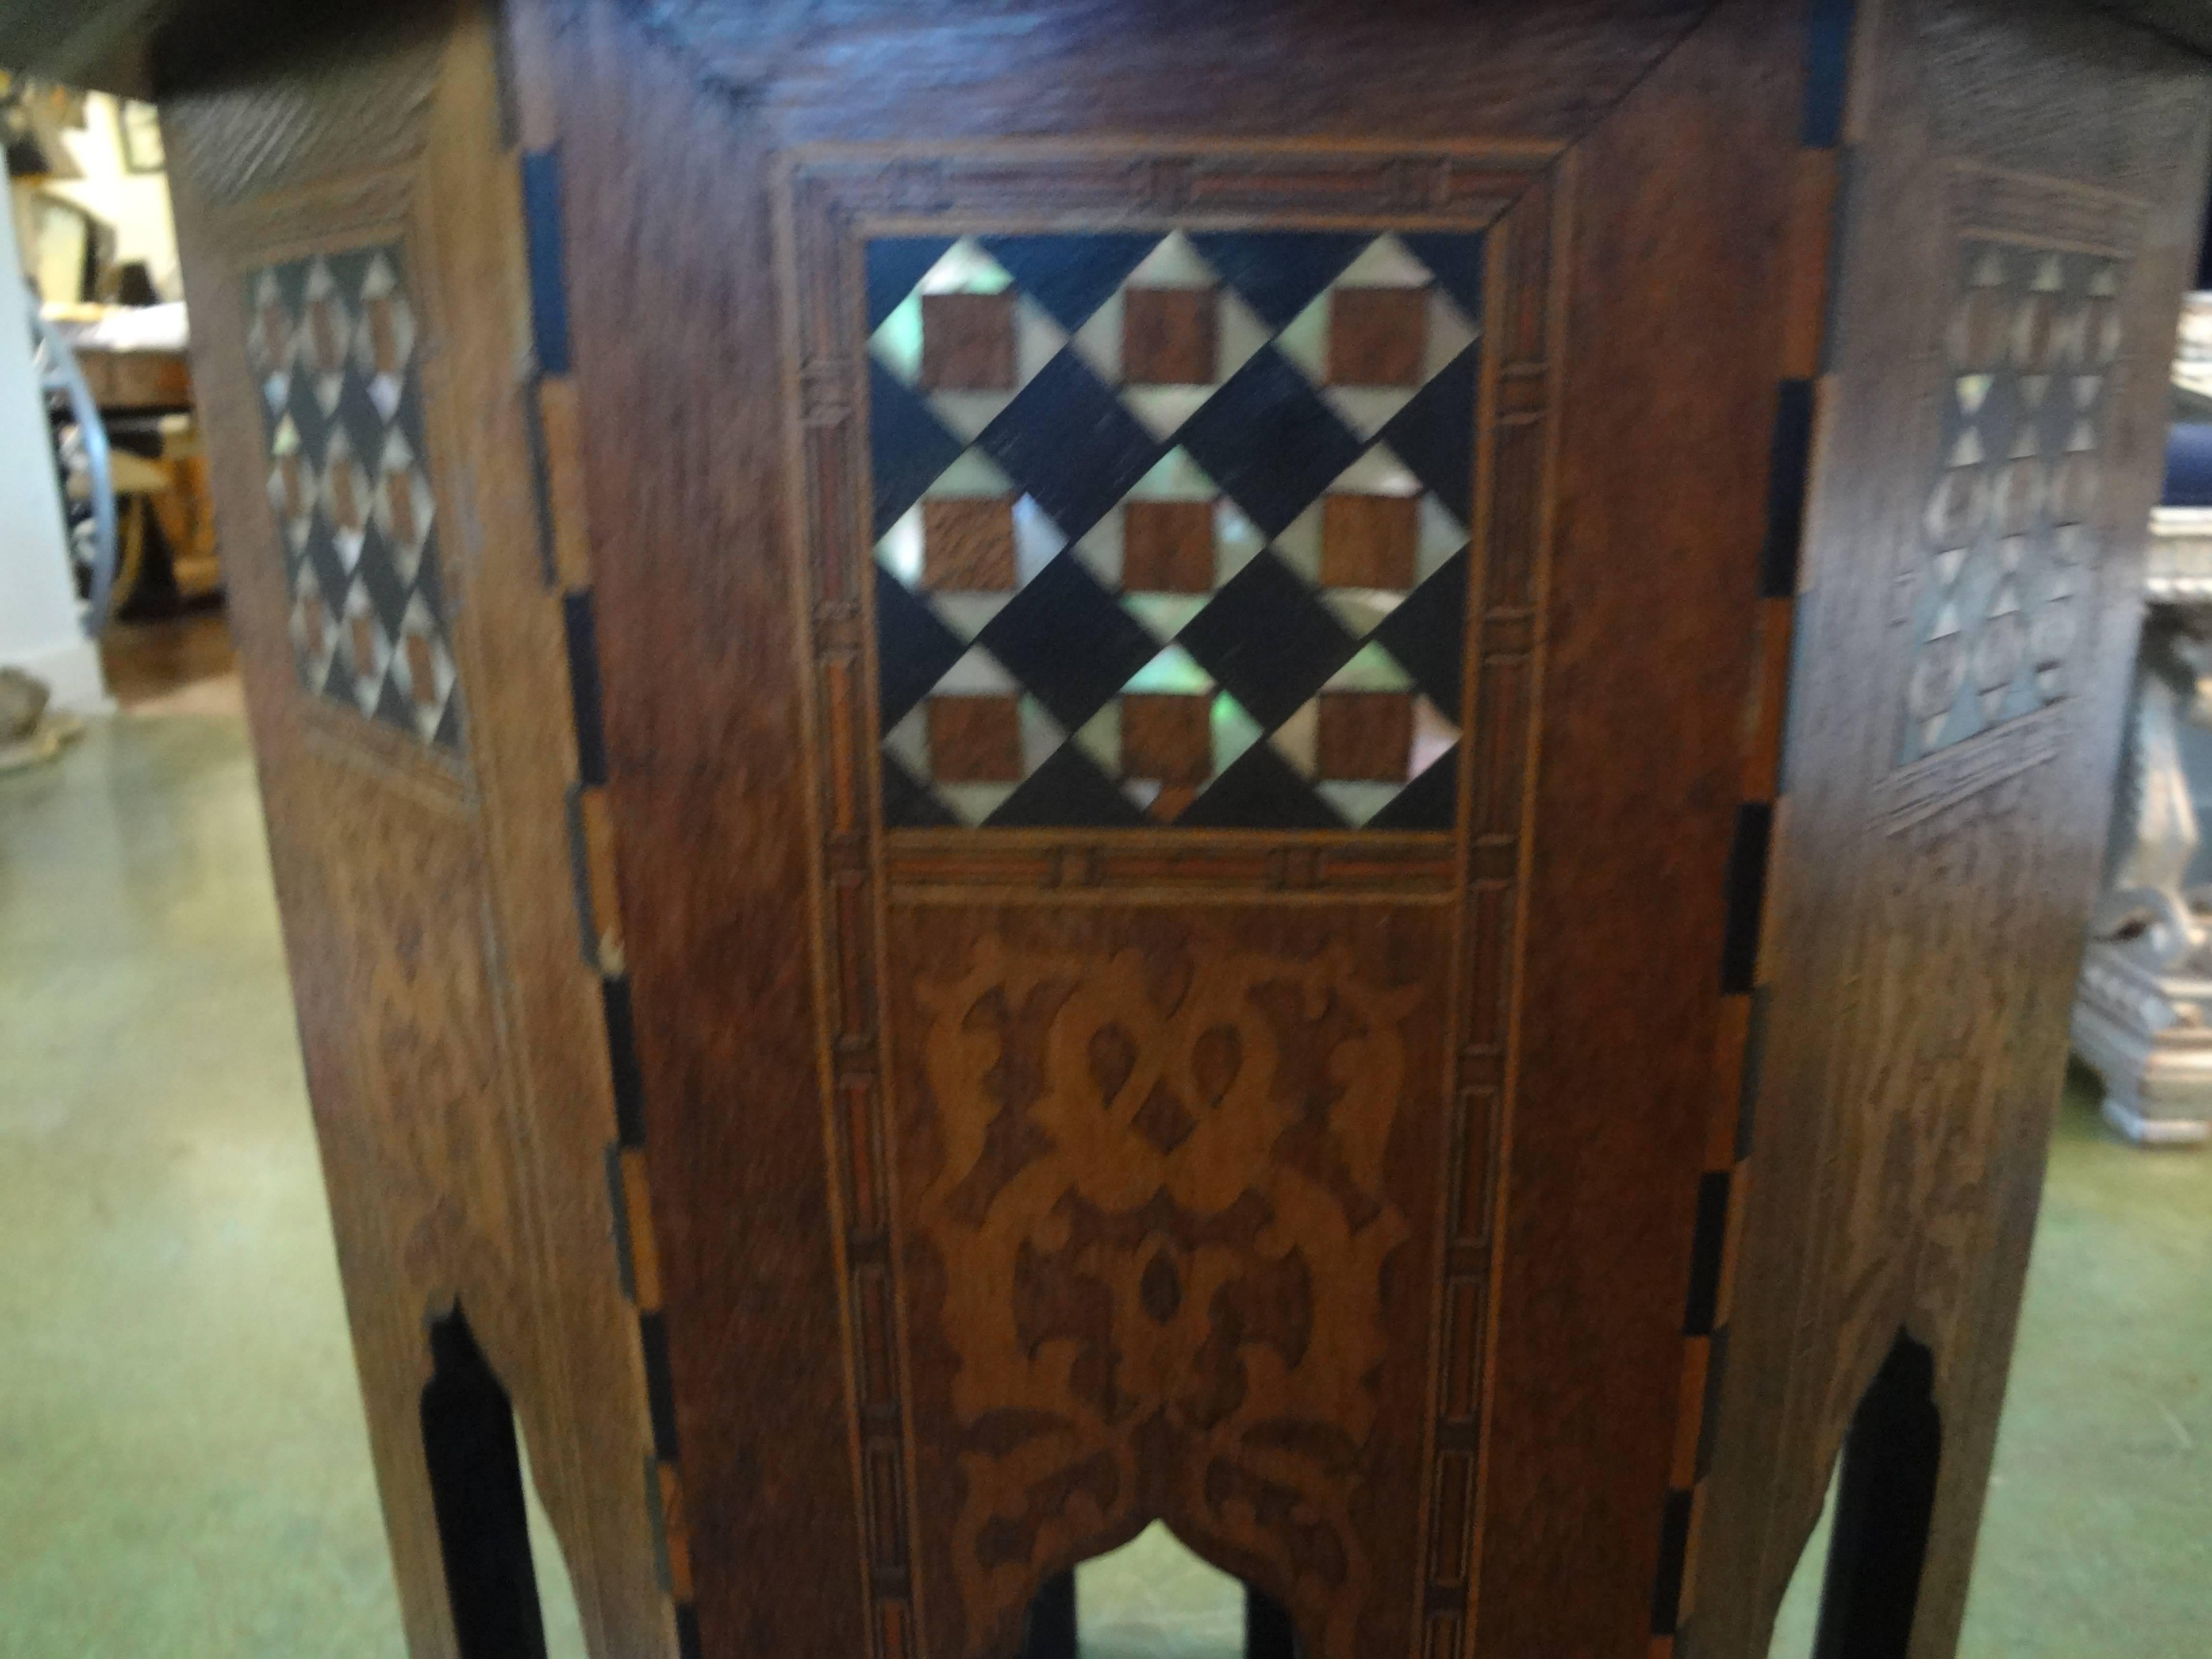 Versatile Moroccan, Syrian or Middle Eastern octagon side table intricately inlaid with mixed woods and mother-of-pearl in a geometric pattern.